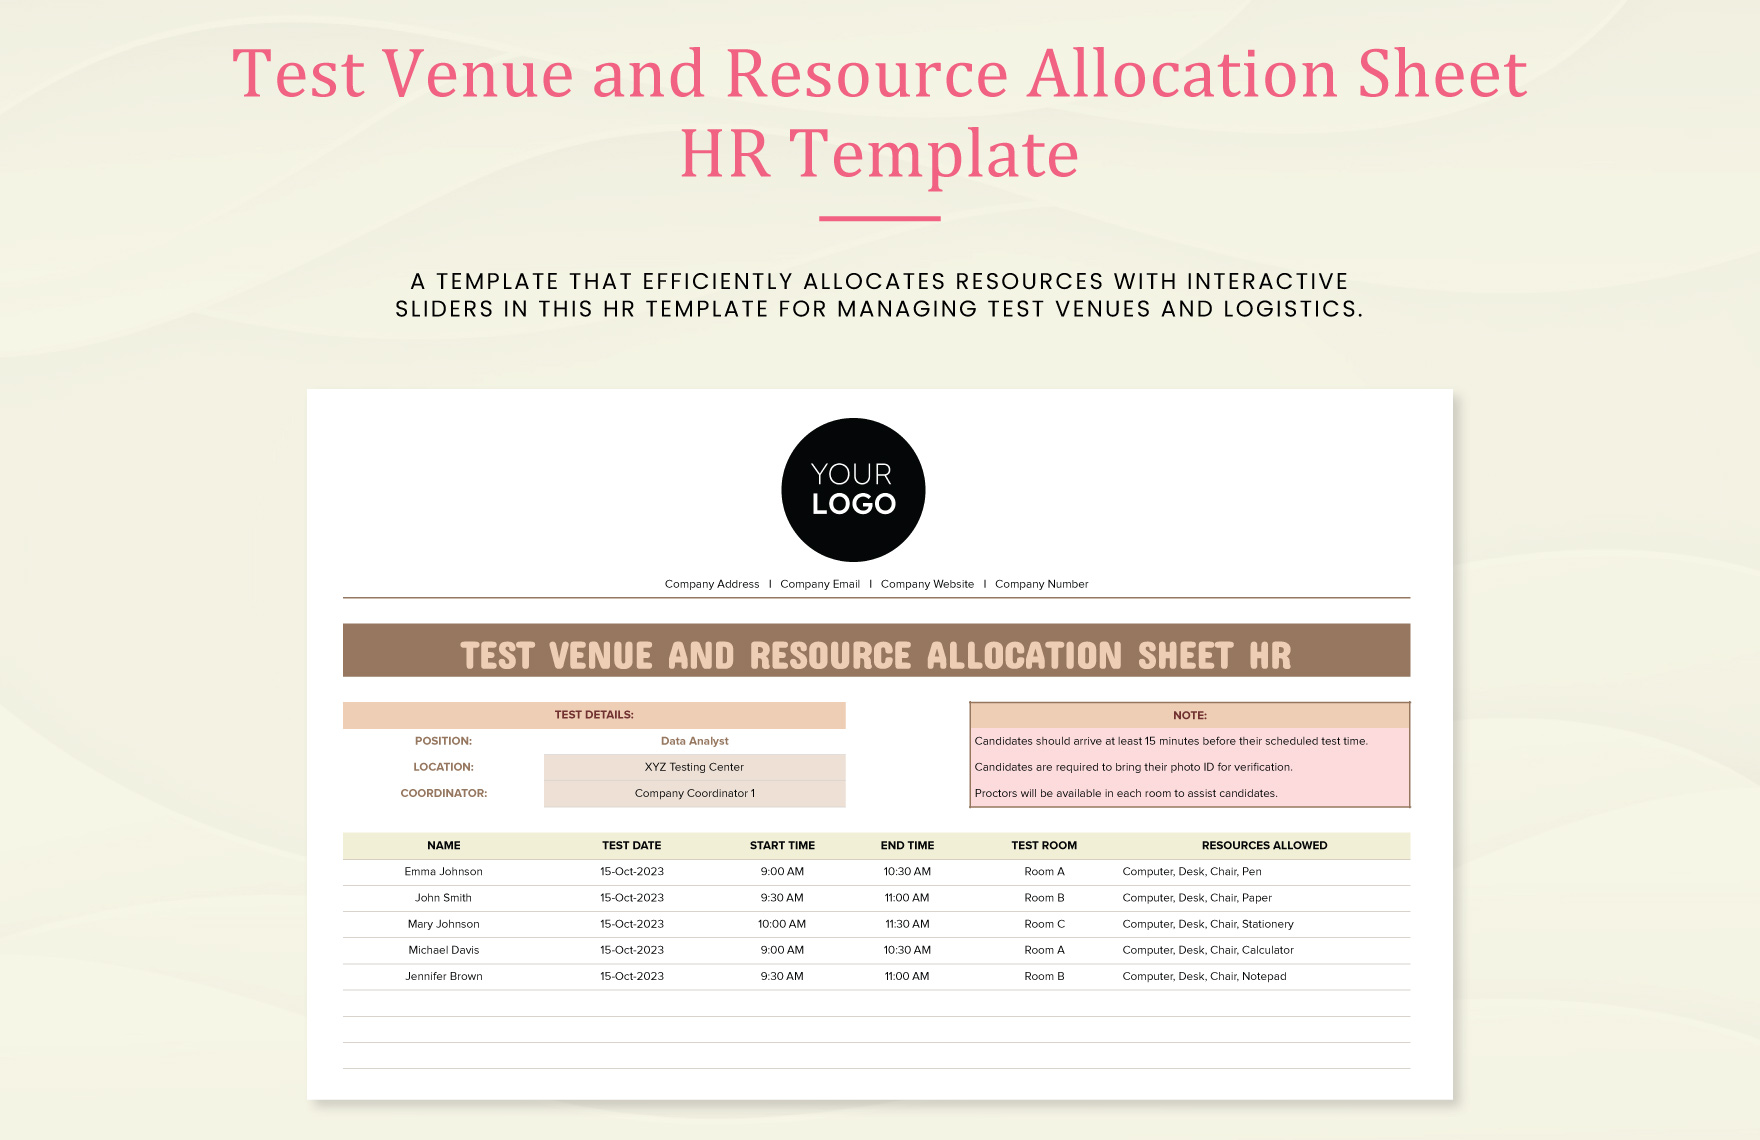 Test Venue and Resource Allocation Sheet HR Template